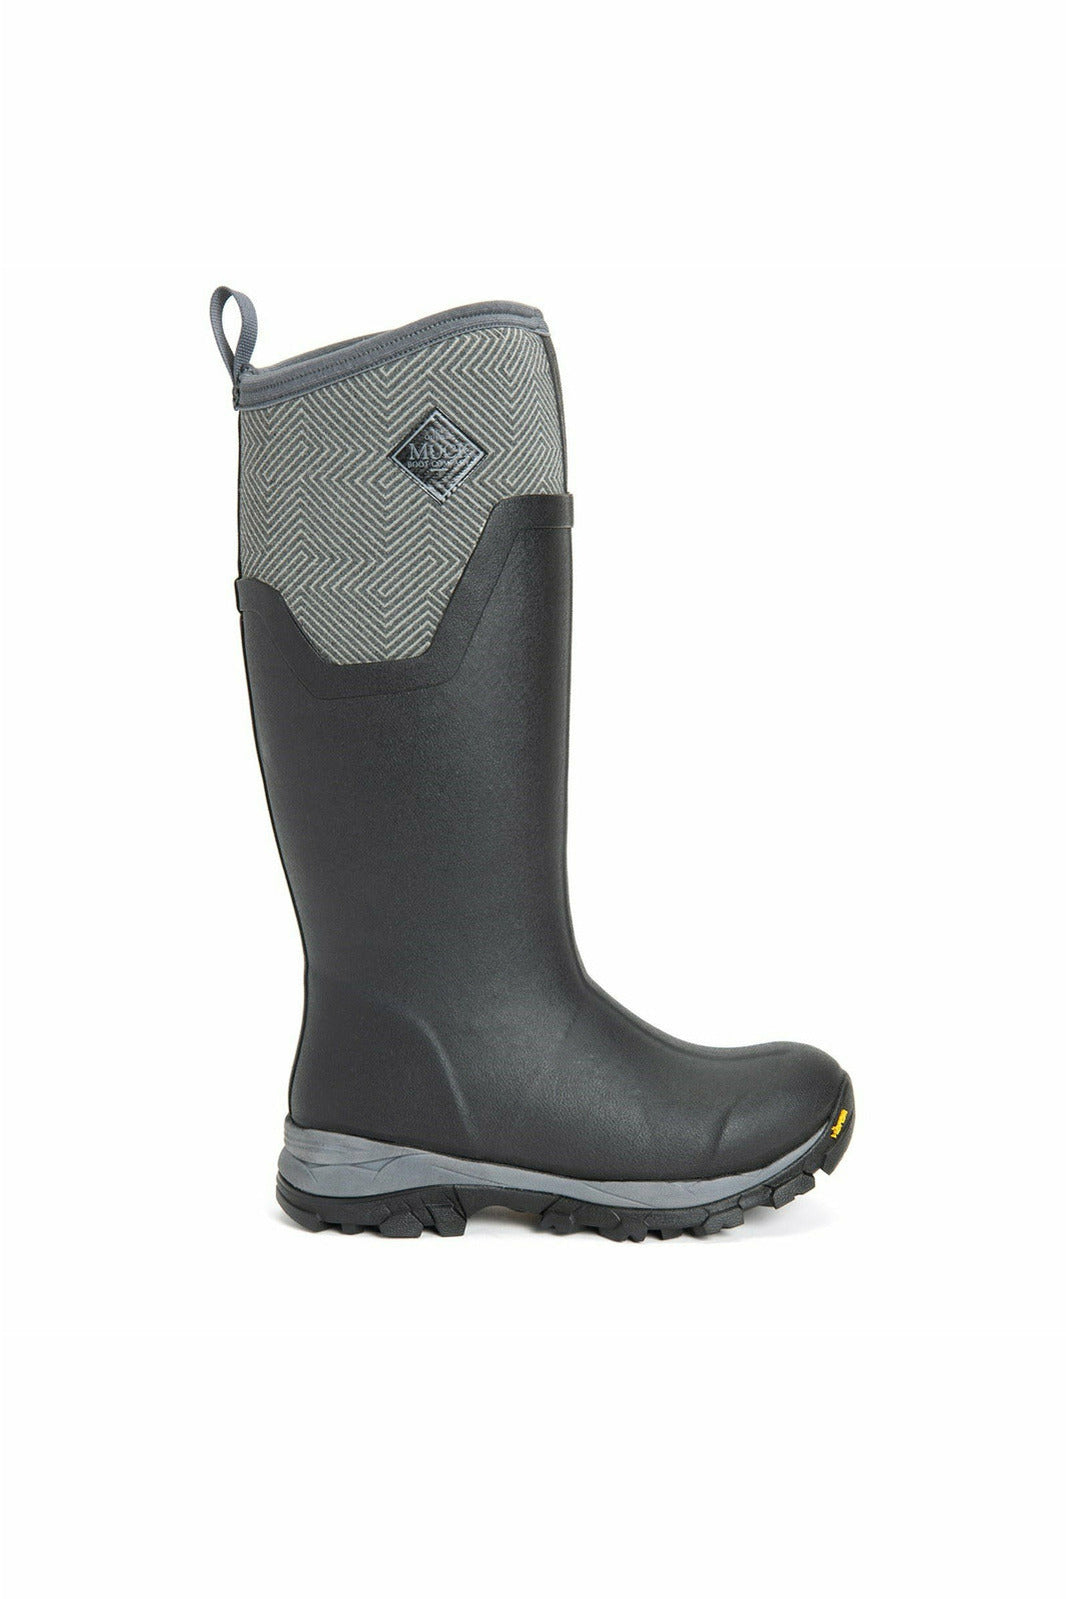 Muck Boots - Arctic Ice Tall Womens Wellingtons